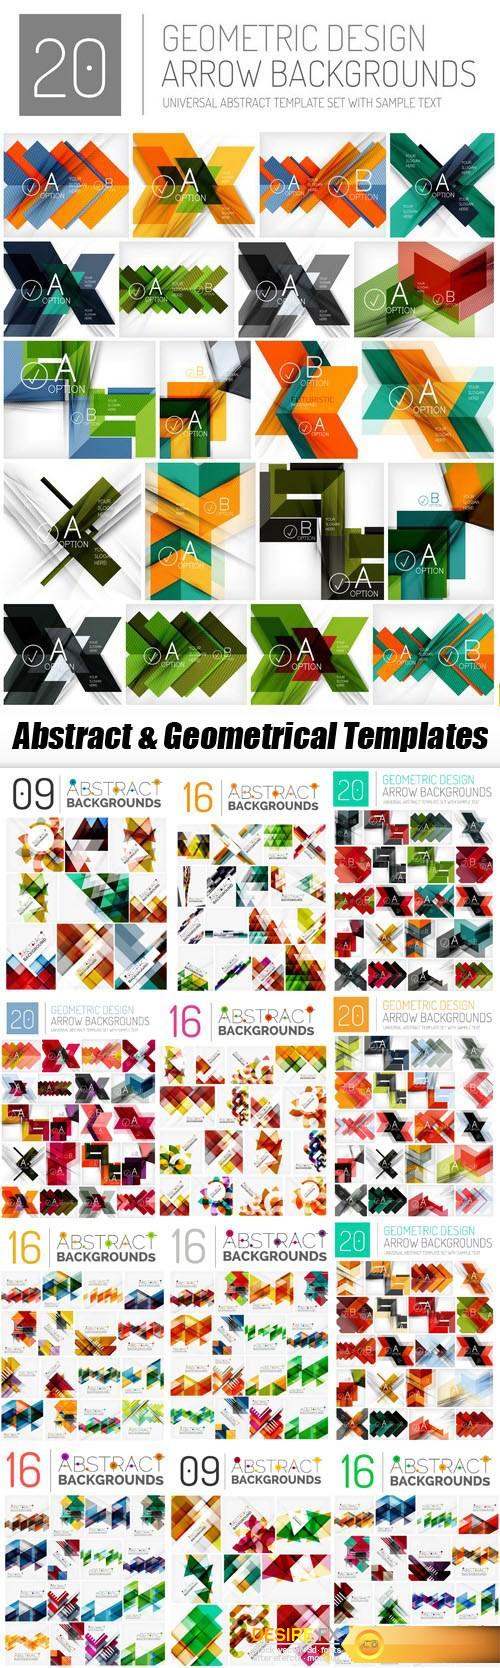 Abstract & Geometrical Templates 